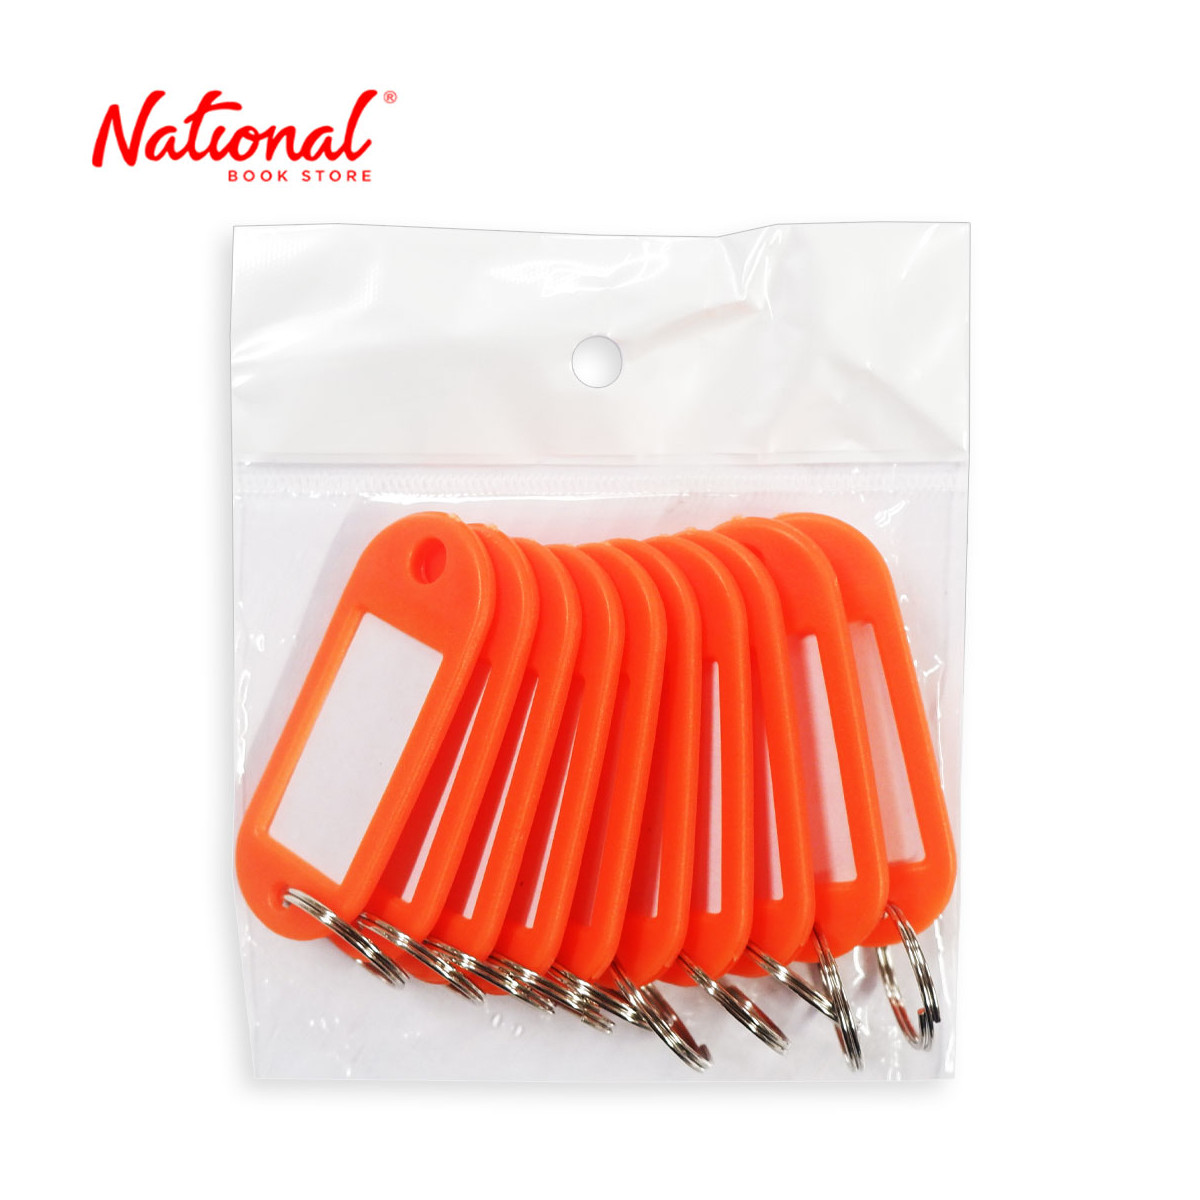 Tiger Key Tags 10 pieces Per Pack, Orange - Office Stationery - Filing Accessories